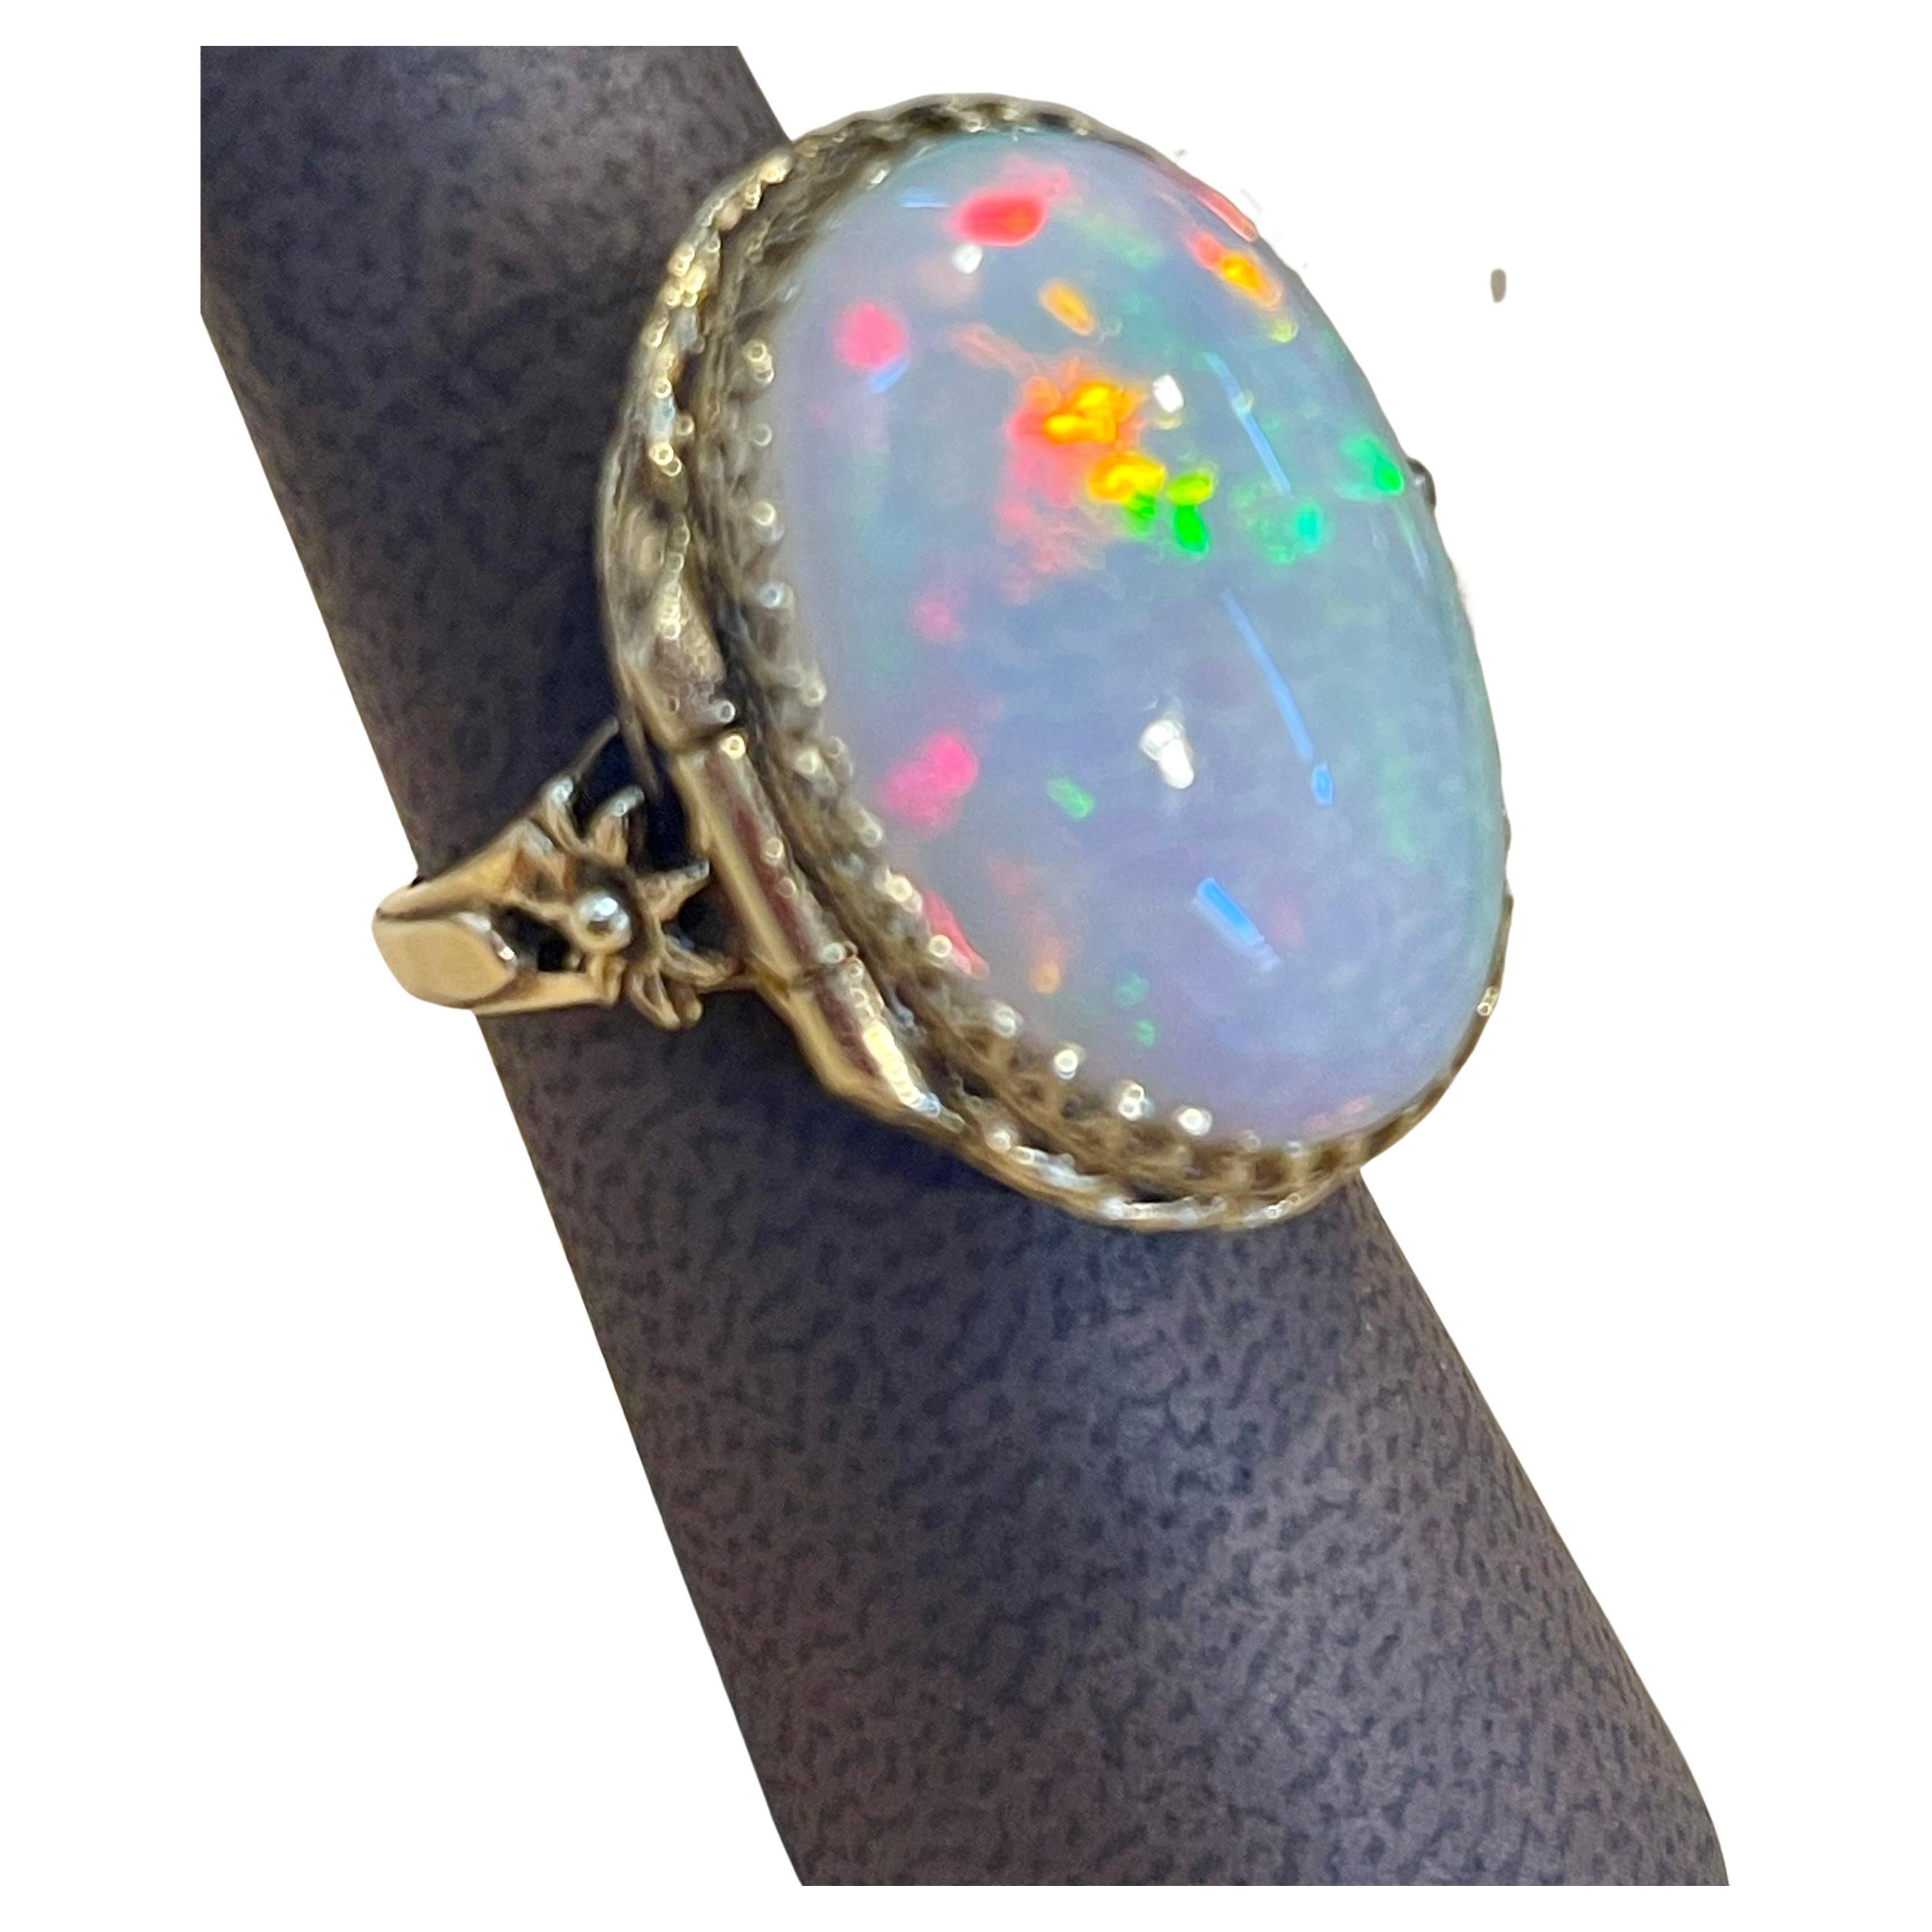 A Huge Cocktail ring 
Approximately 16 Carat Oval Ethiopian Opal   Ring 14 Karat Yellow Gold Size 7
This spectacular Ring consisting of a single Oval Shape Ethiopian Opal Approximately 16 Carat. 

very clean Stone no inclusion , full of luster and